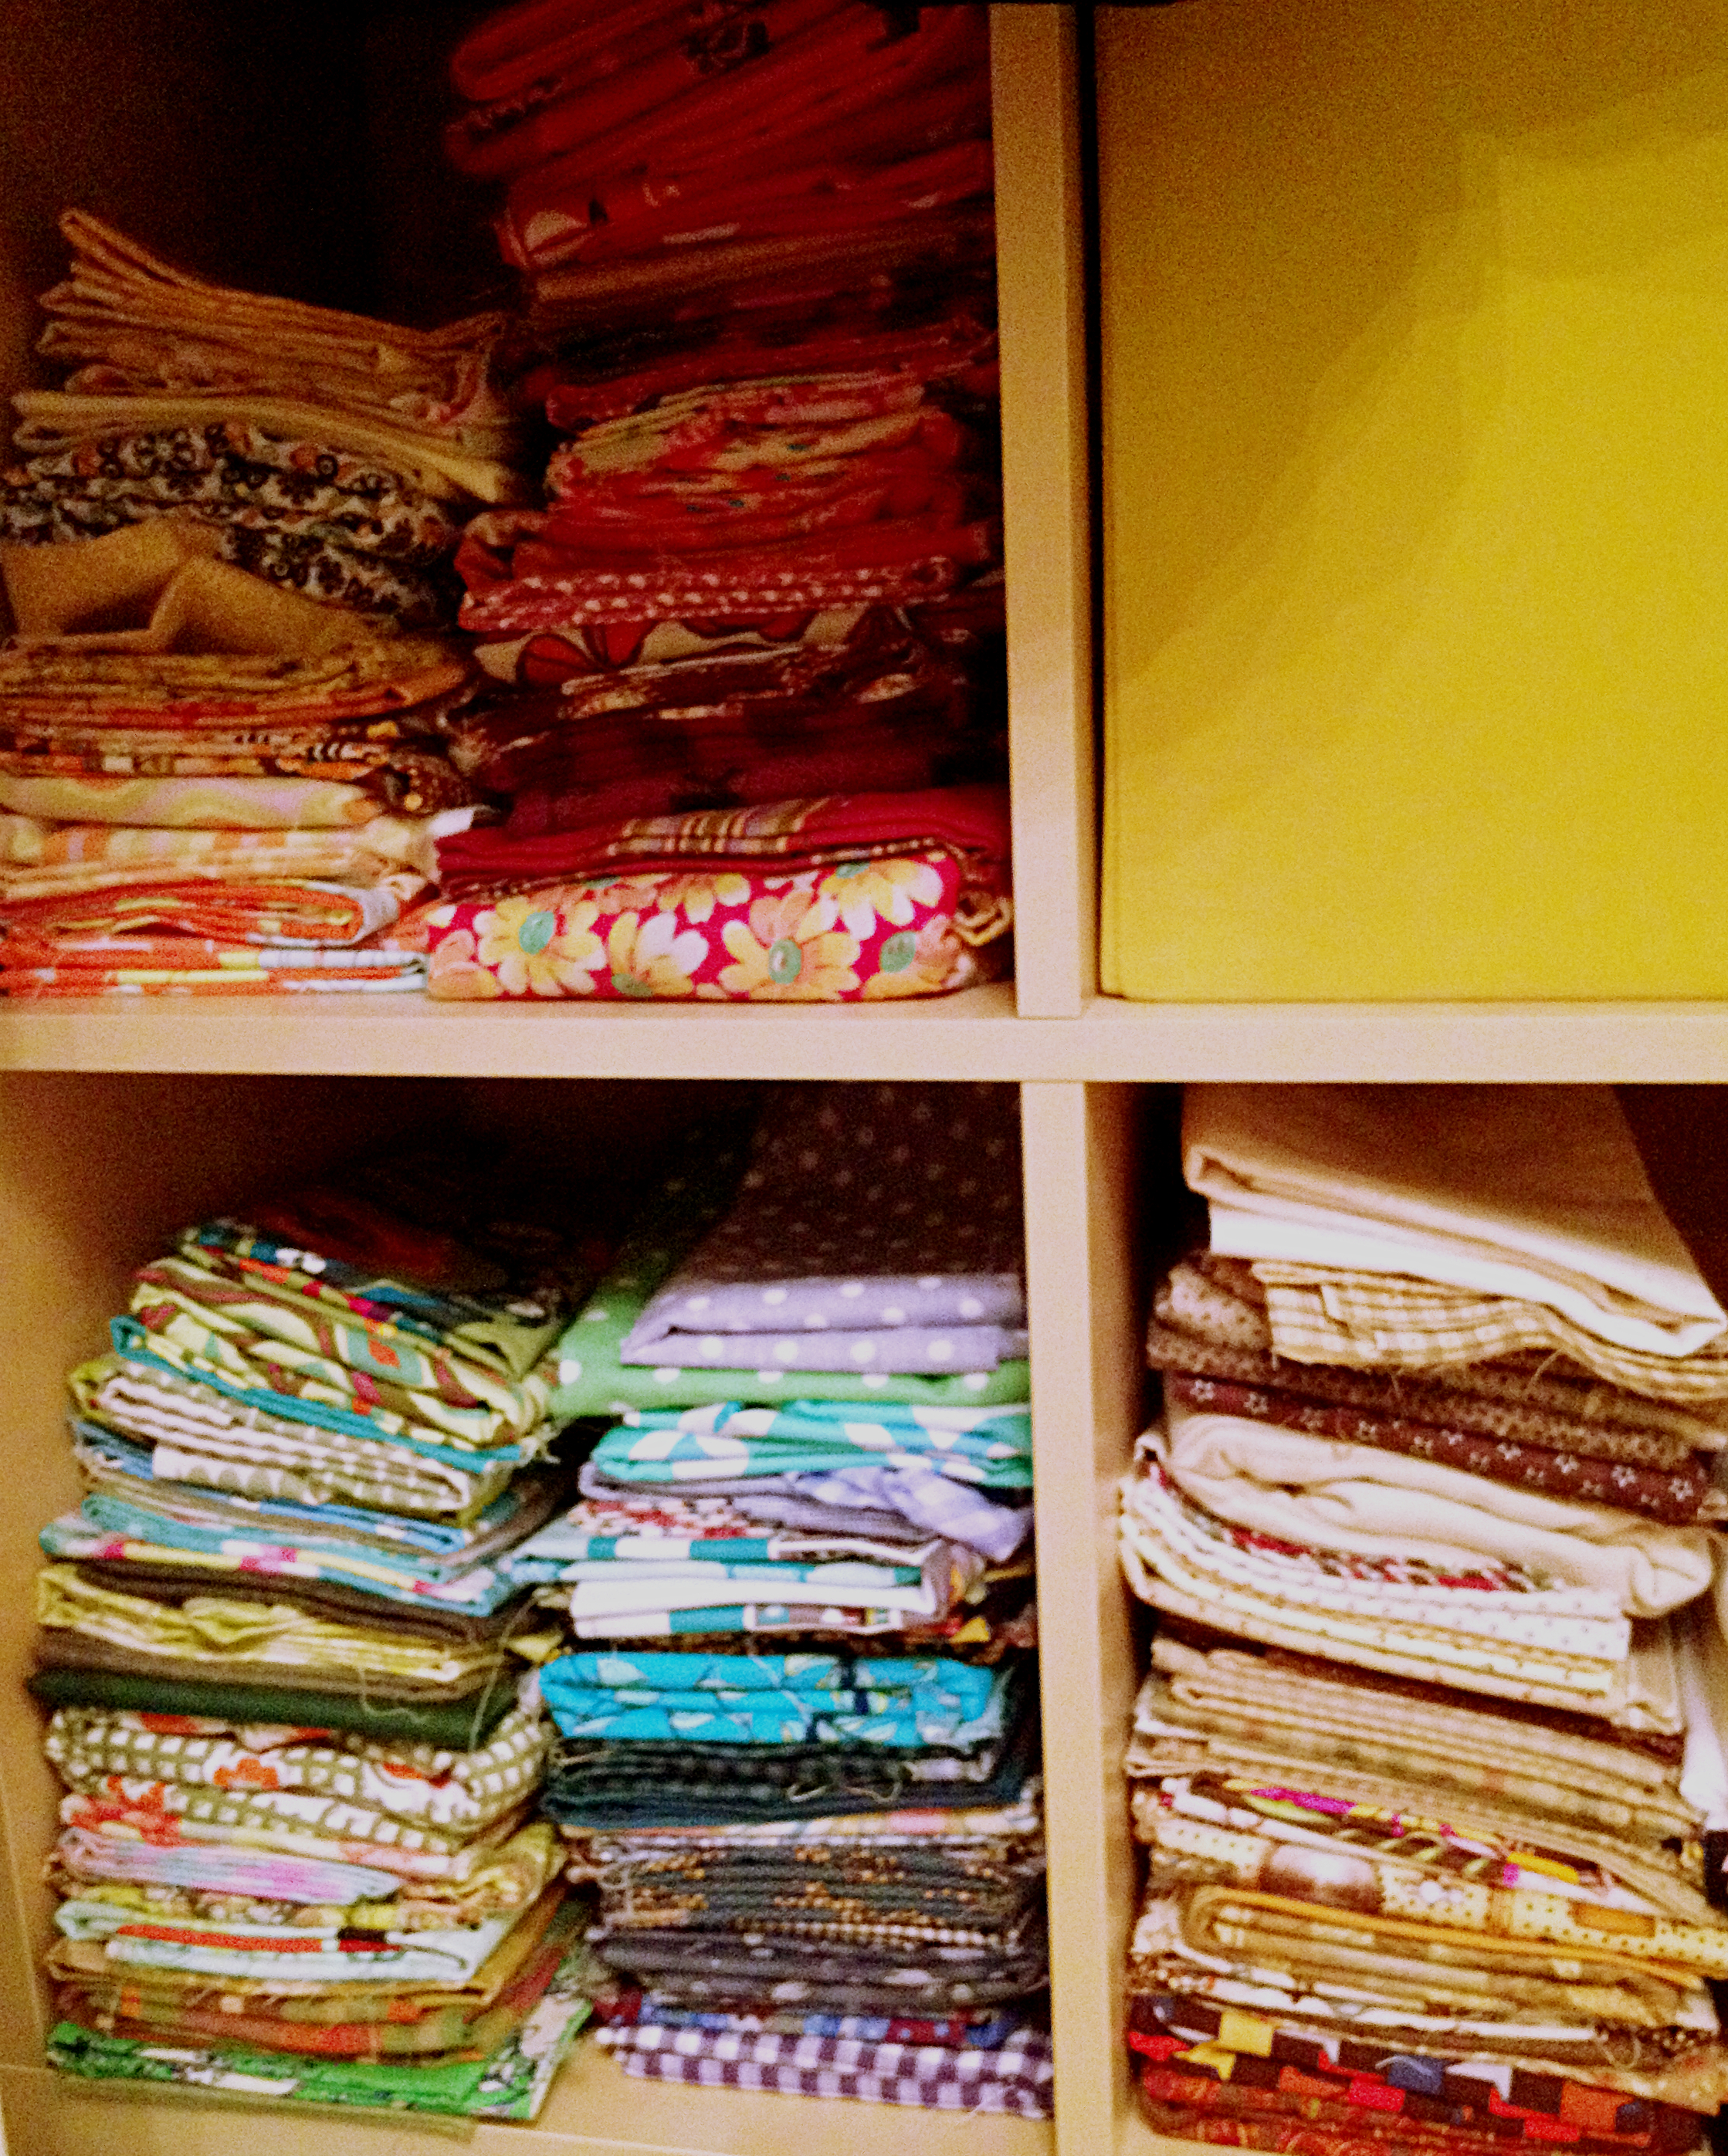 .this is a small selection of the fabric we own.